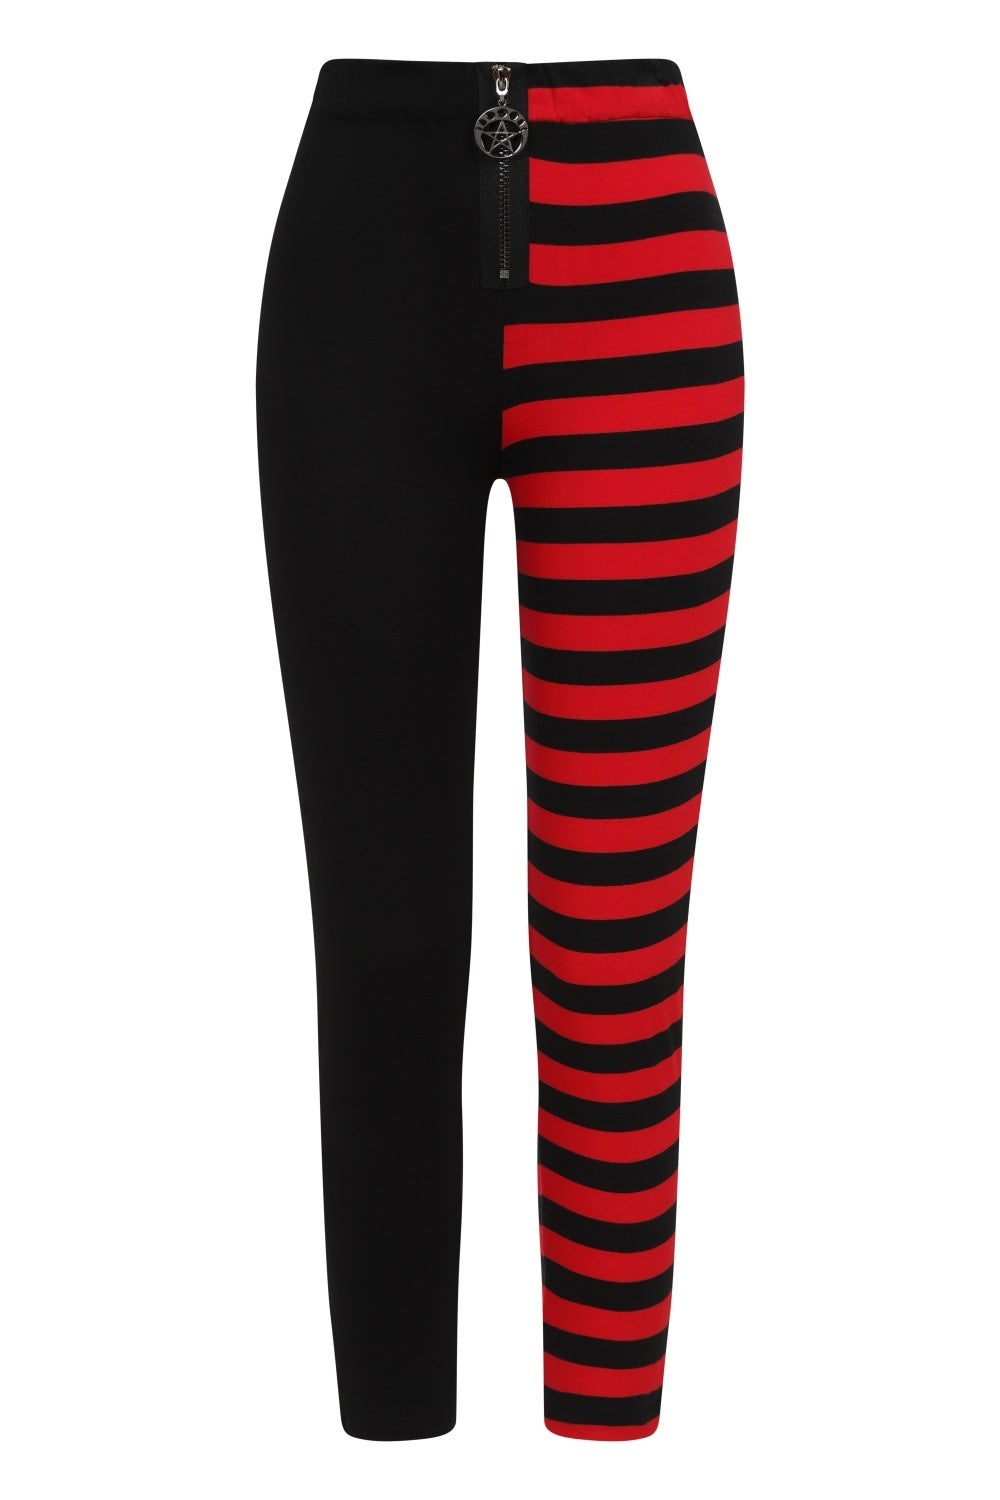 High waisted leggings with one black leg and one red striped leg. Pentagram zip detail. 